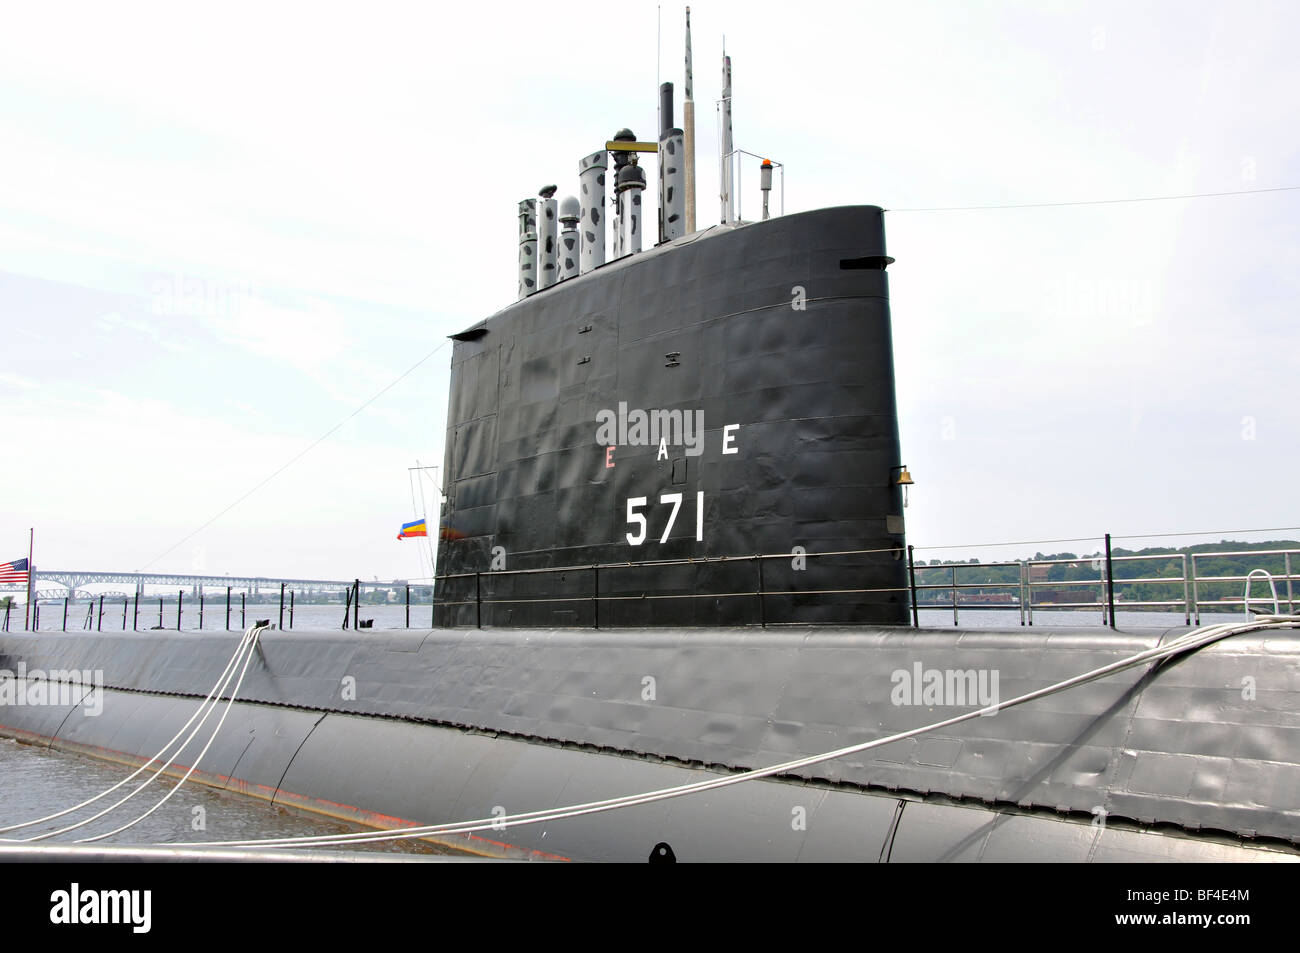 USS Nautilus - the 1st U.S. nuclear submarine at The Submarine Force Museum, Groton, Connecticut, USA Stock Photo